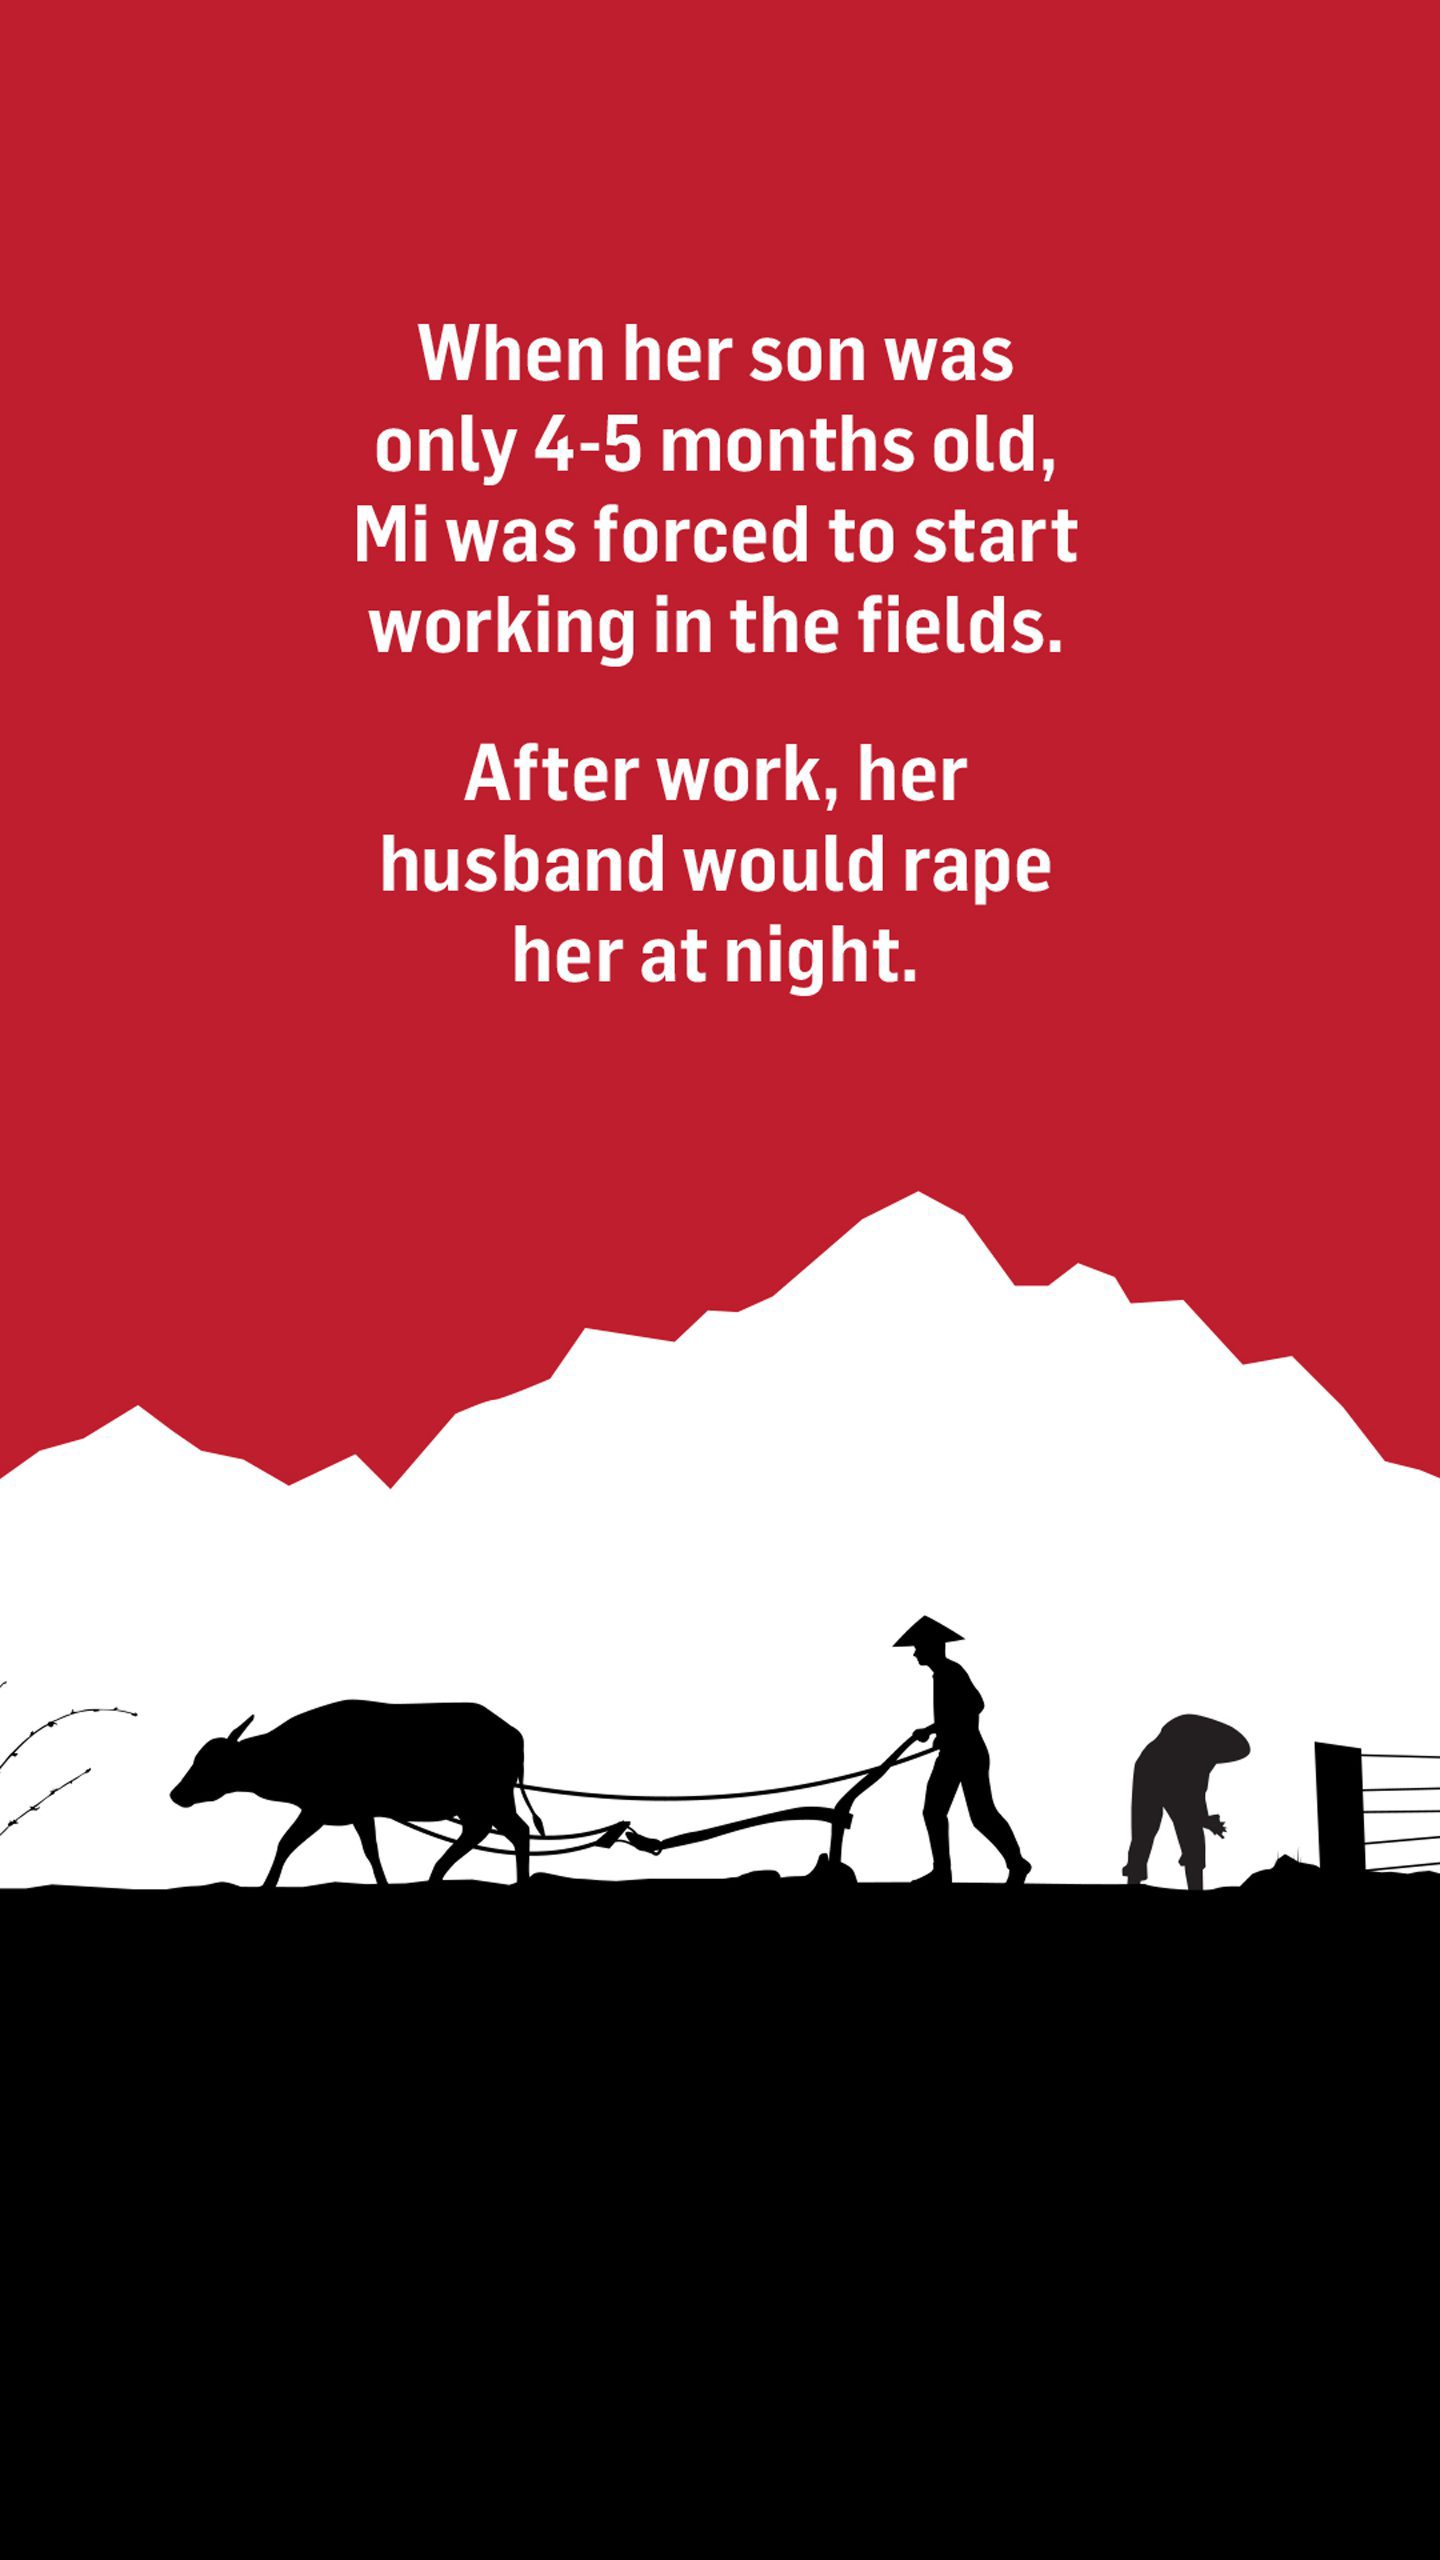 An image of a people working in a farm field with a cow. Text reads: When her son was only four-five months old, Mi was forced to start working in the fields.

After work, her husband would rape her.